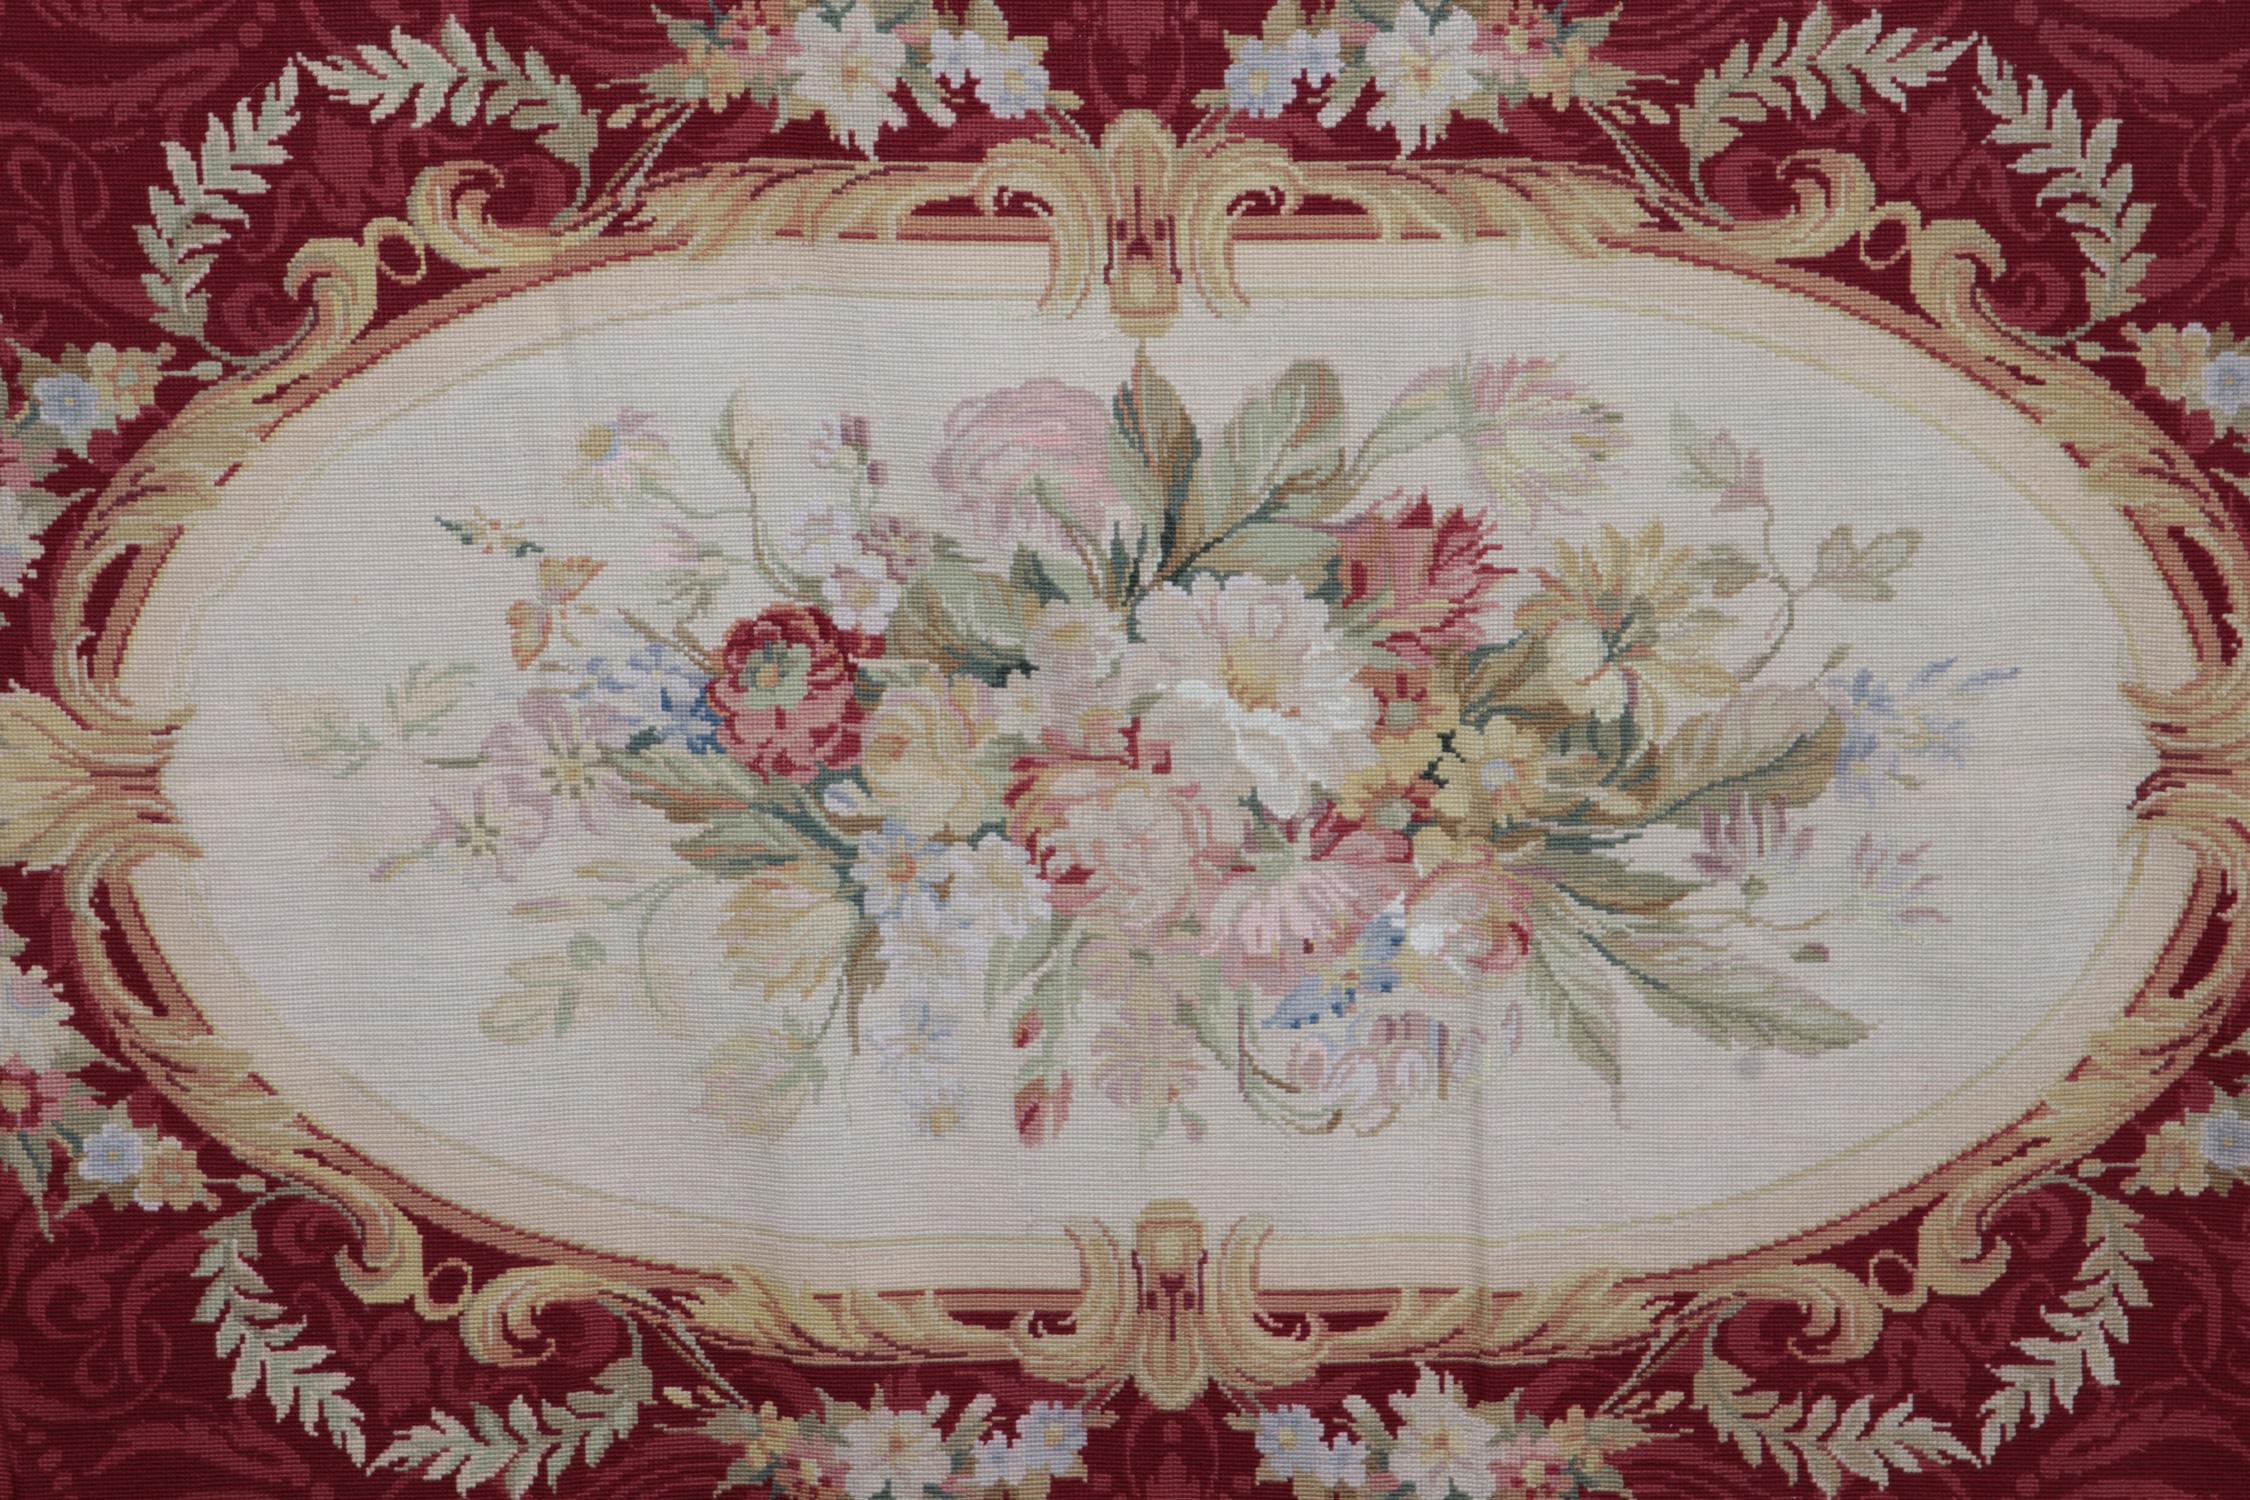 This high-quality floral needlepoint piece is perfect for any modern or traditional interiors. Hang on your wall and instantly enhance your rooms aesthetic, or place on the floor as a bedroom rug or living room rug. This item is sure to make a